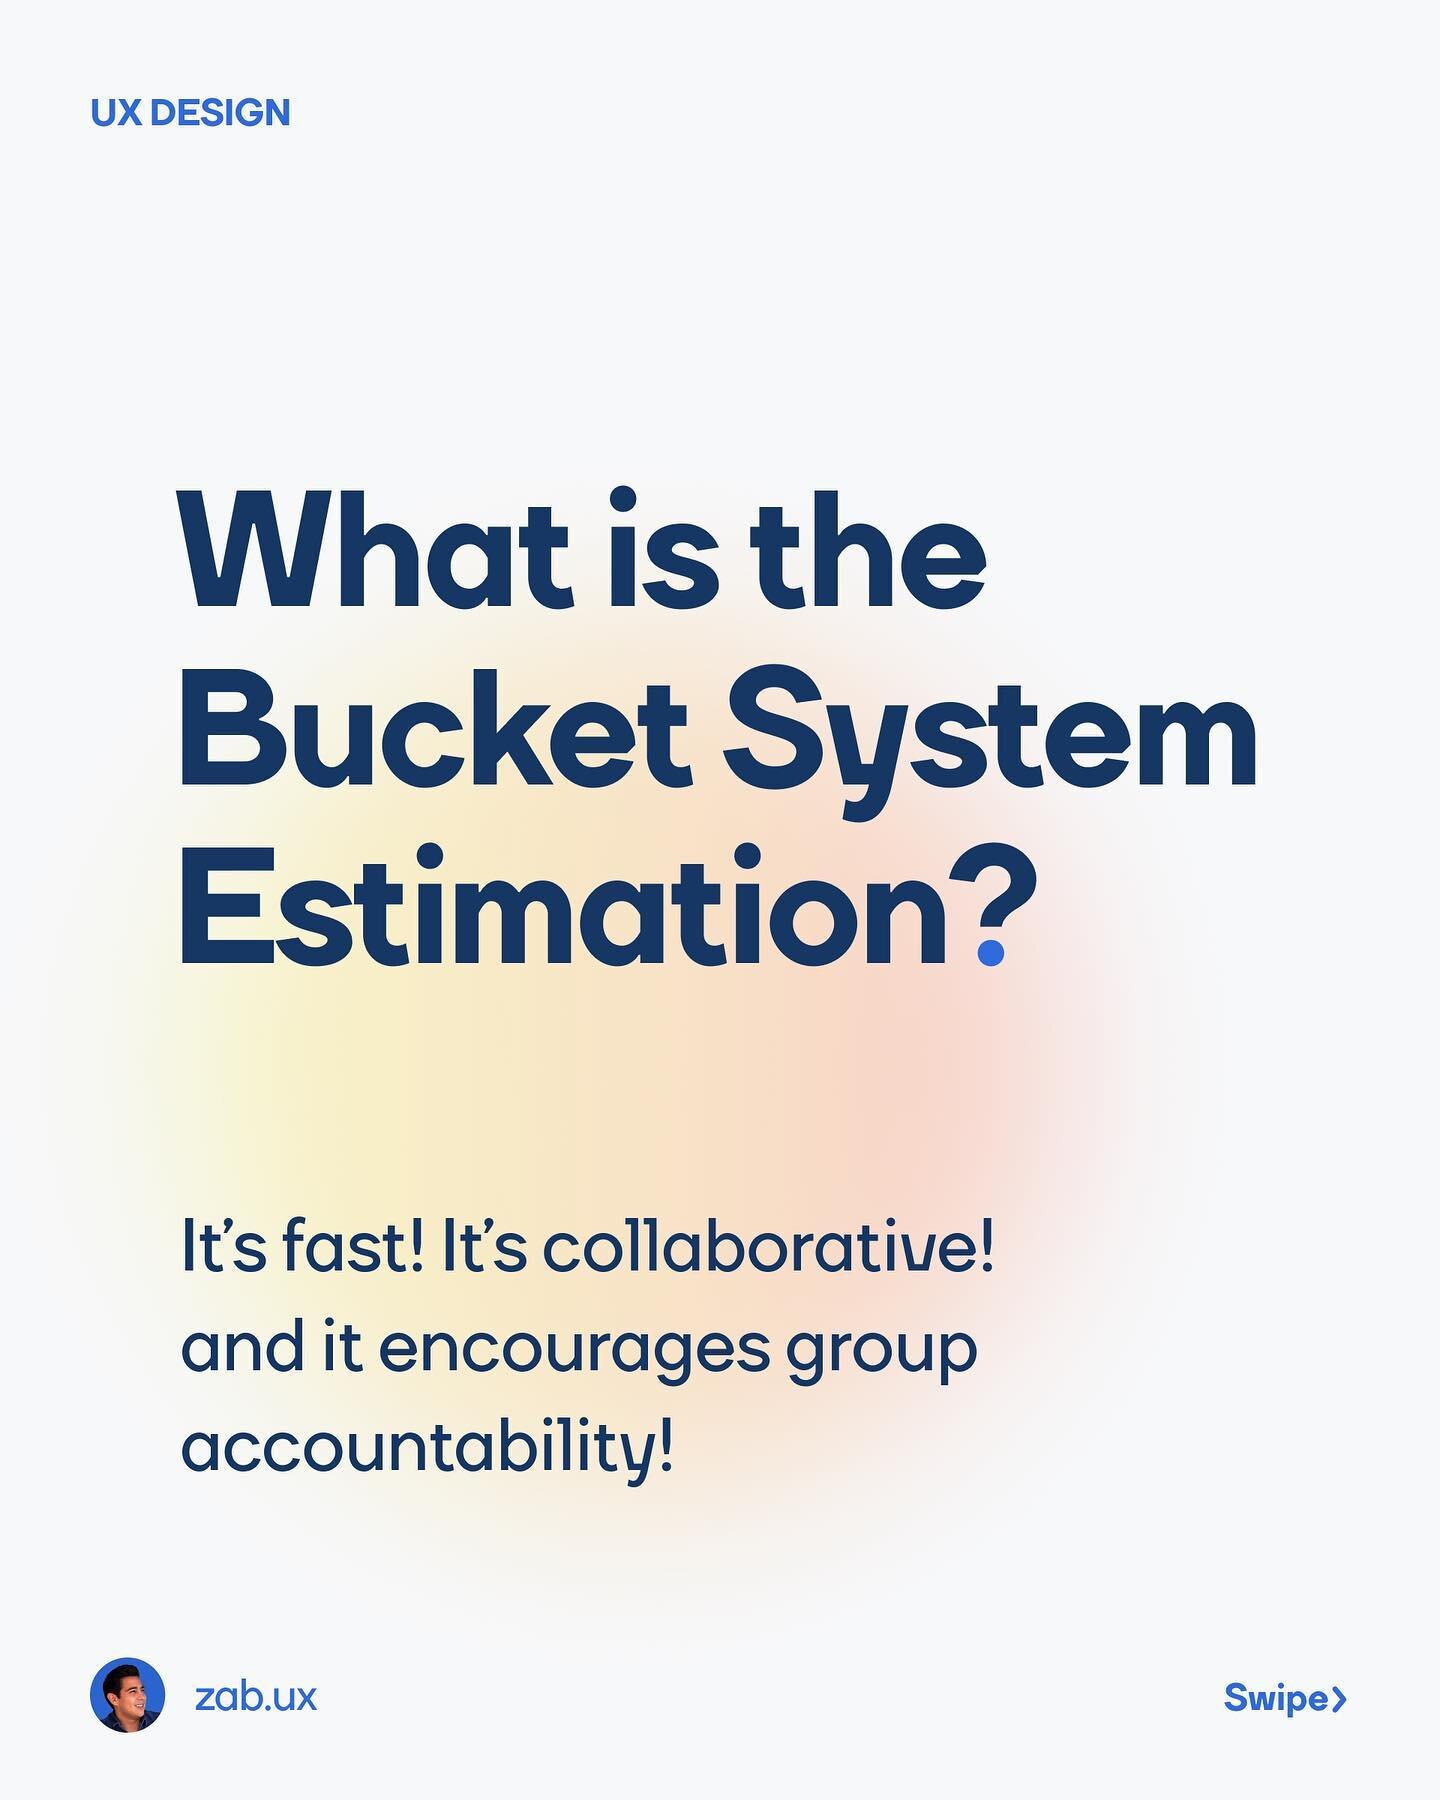 Sometimes we just need to prioritize ahead of time before 💩 hits the.. you know! Bucket System helps prioritize and measure efforts ahead of time so we can alleviate pains.
.
.
#design #designcareer #designprocess #designer #designers #uxdesign #pro